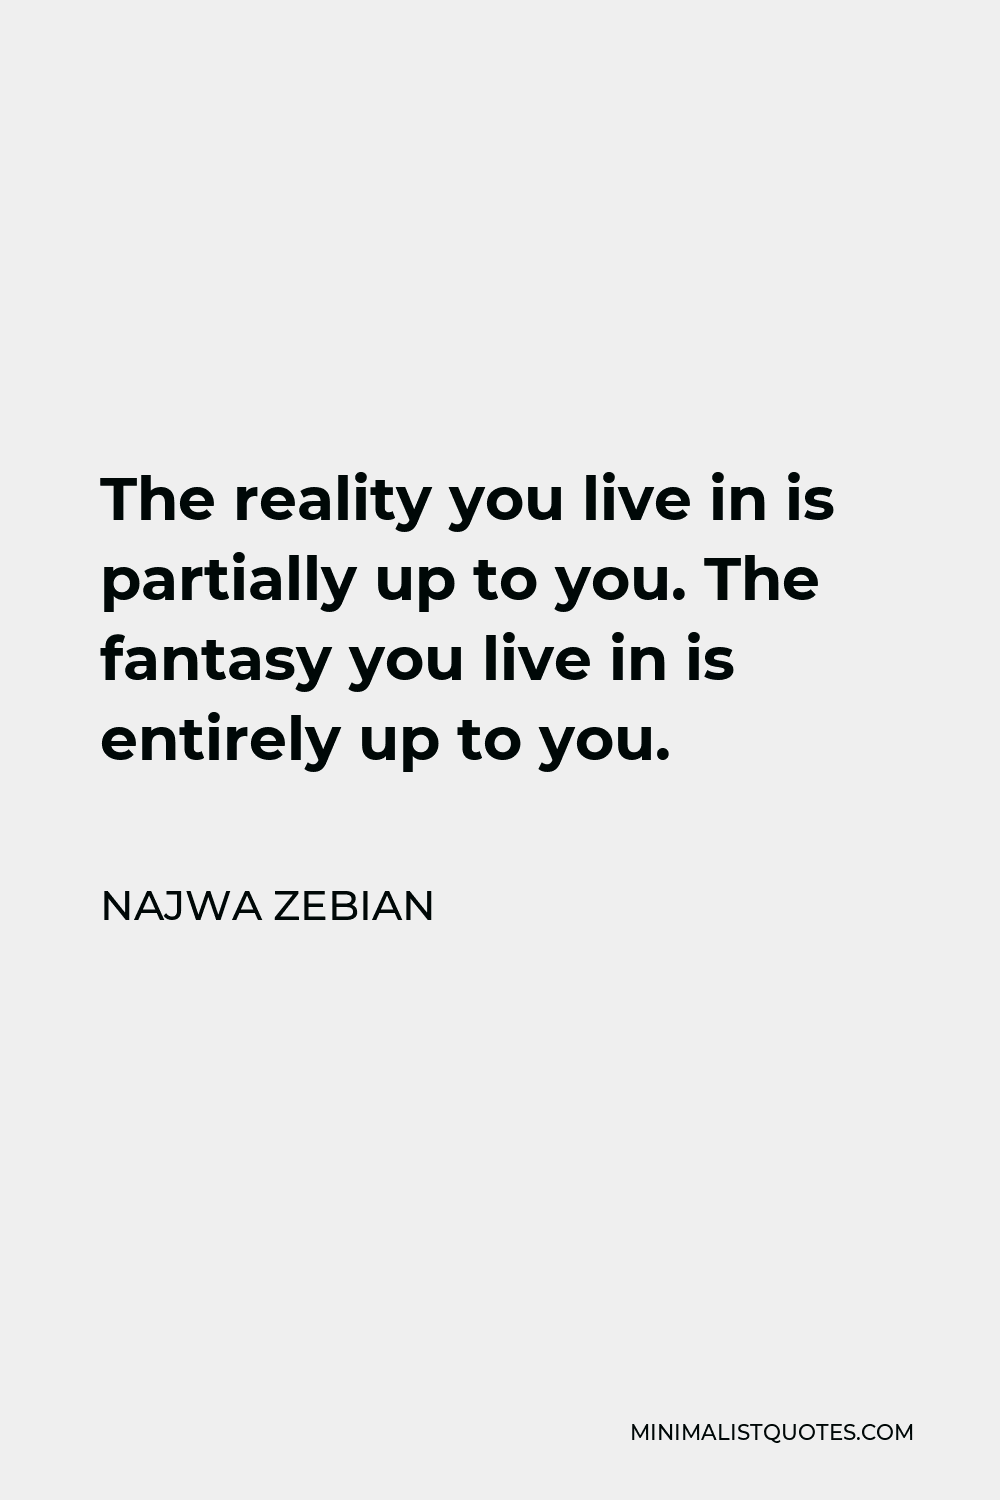 Najwa Zebian Quote - The reality you live in is partially up to you. The fantasy you live in is entirely up to you.